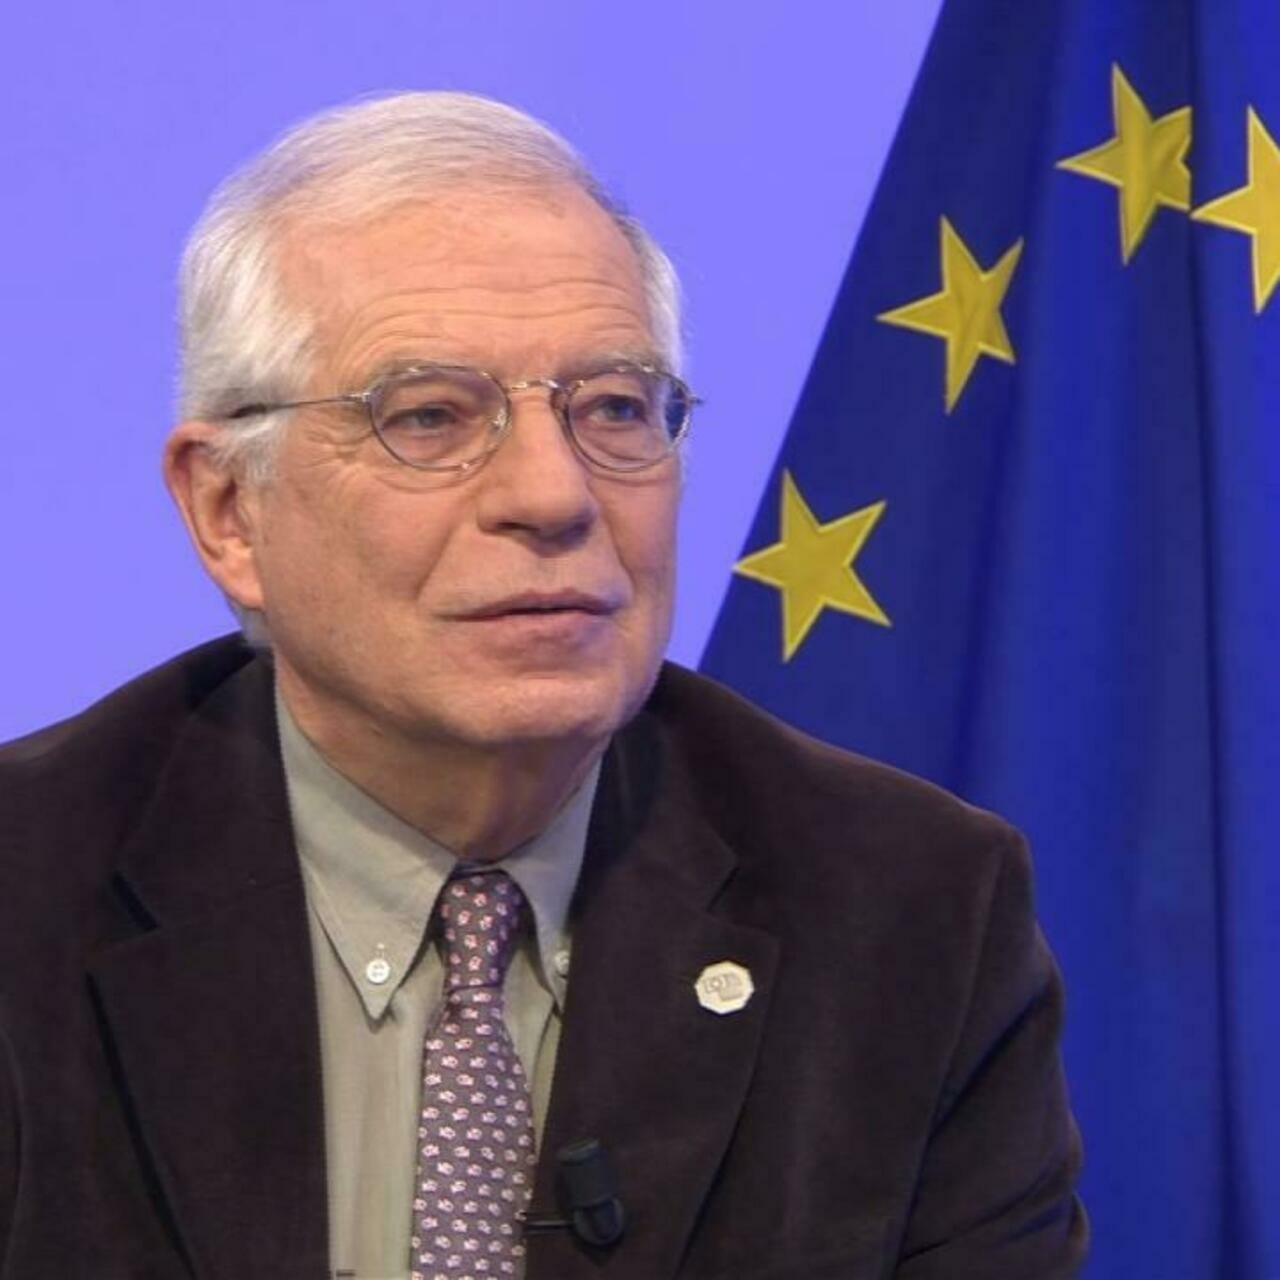 EU Foreign Policy Chief insists on preserving strong partnership with Rabat